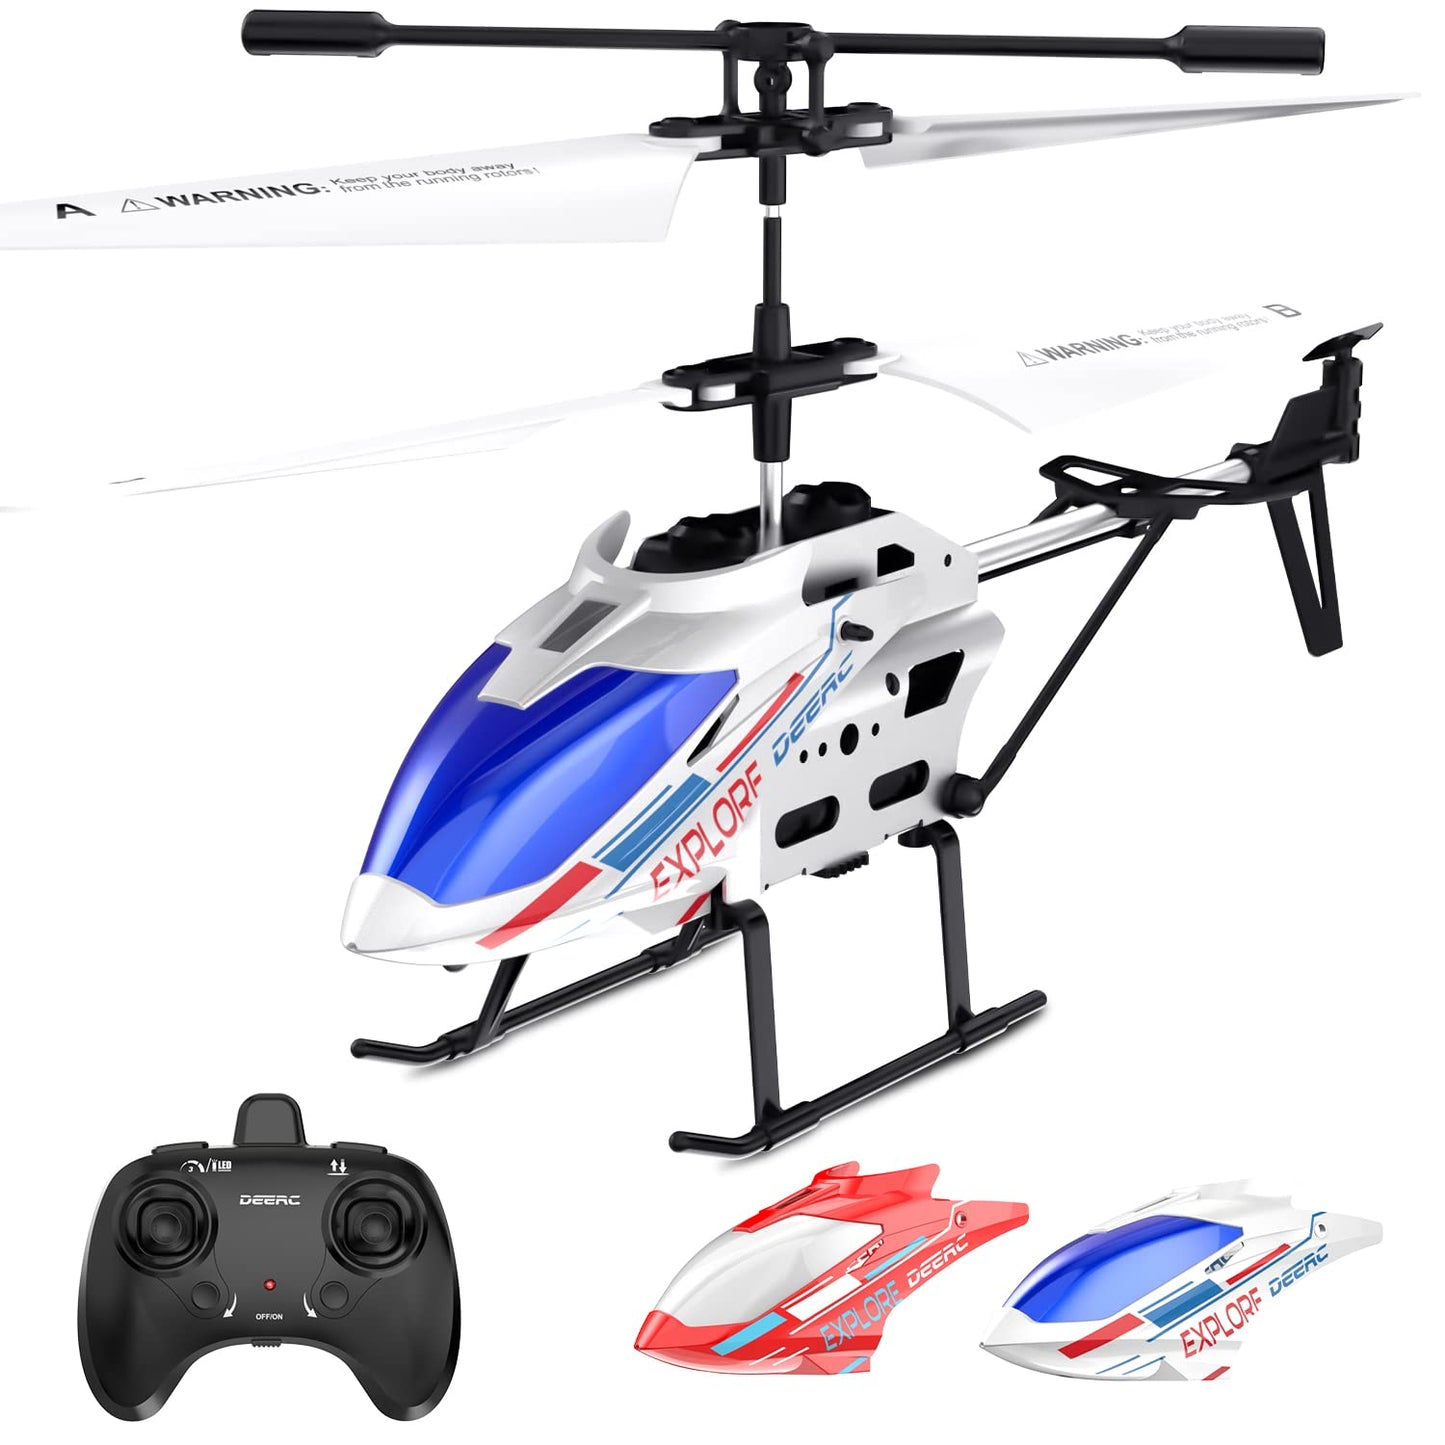 DEERC DE51 Rc Helicopter - Altitude Hold RC Planes With Gyro For Kid Beginner 2.4G Aircraft Indoor Flying Boys Toys